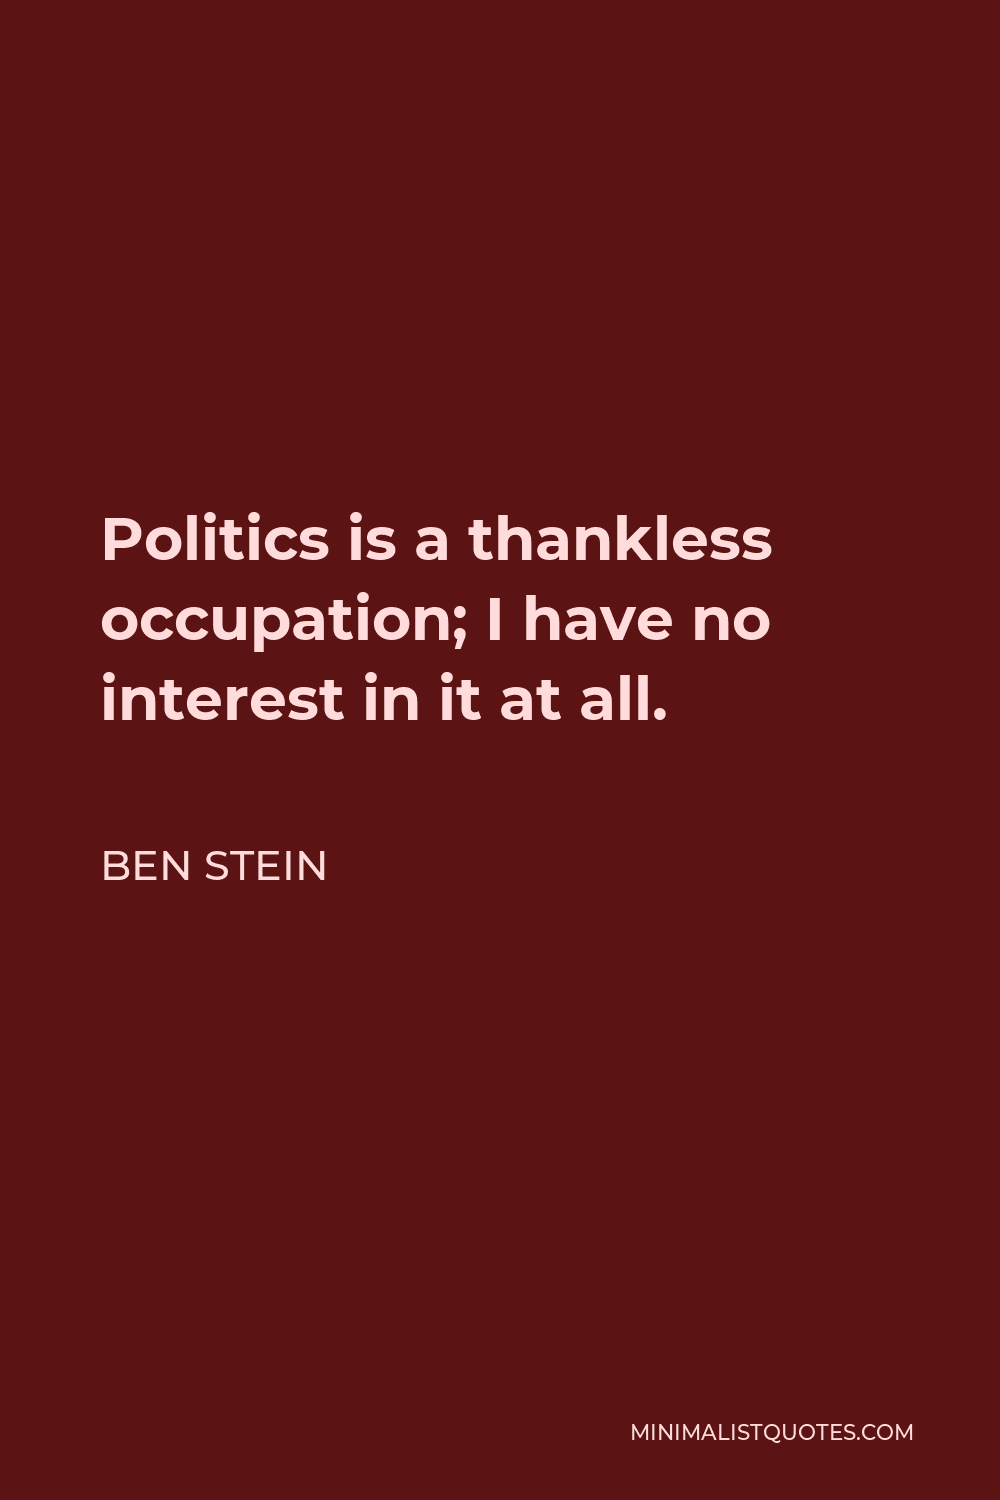 Ben Stein Quote - Politics is a thankless occupation; I have no interest in it at all.